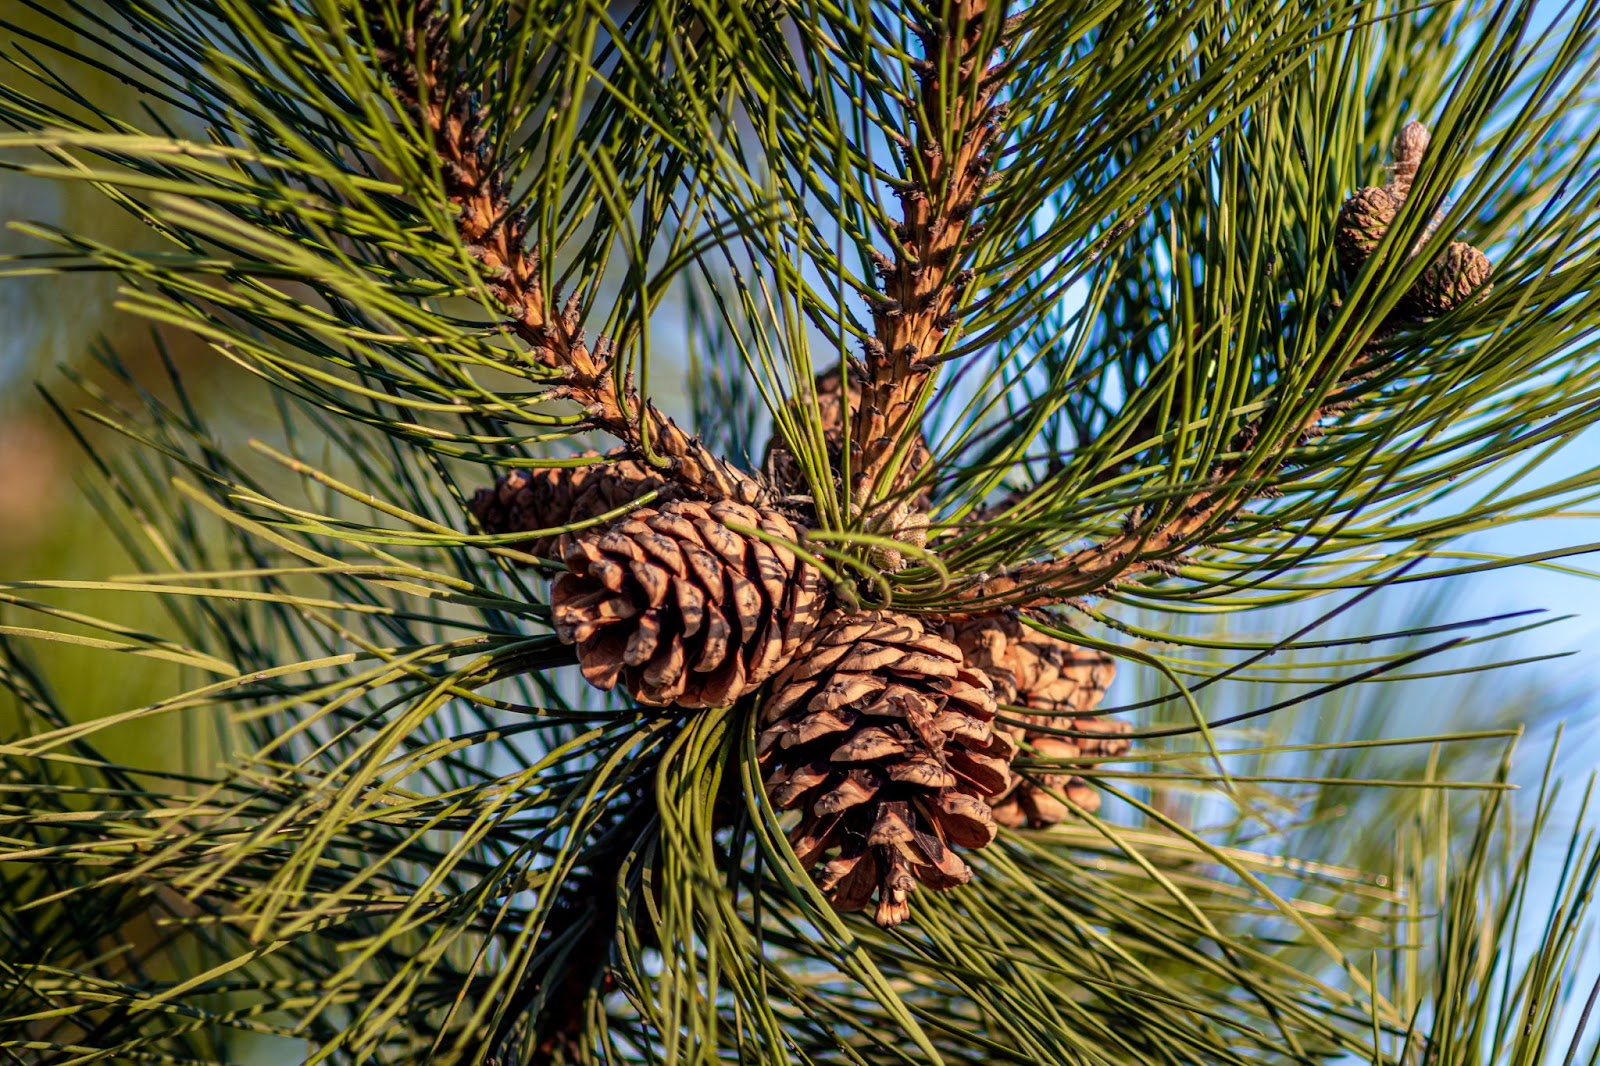 Pinene gives energy and focus, and is believed to have antidepressant and anti-cancer properties.